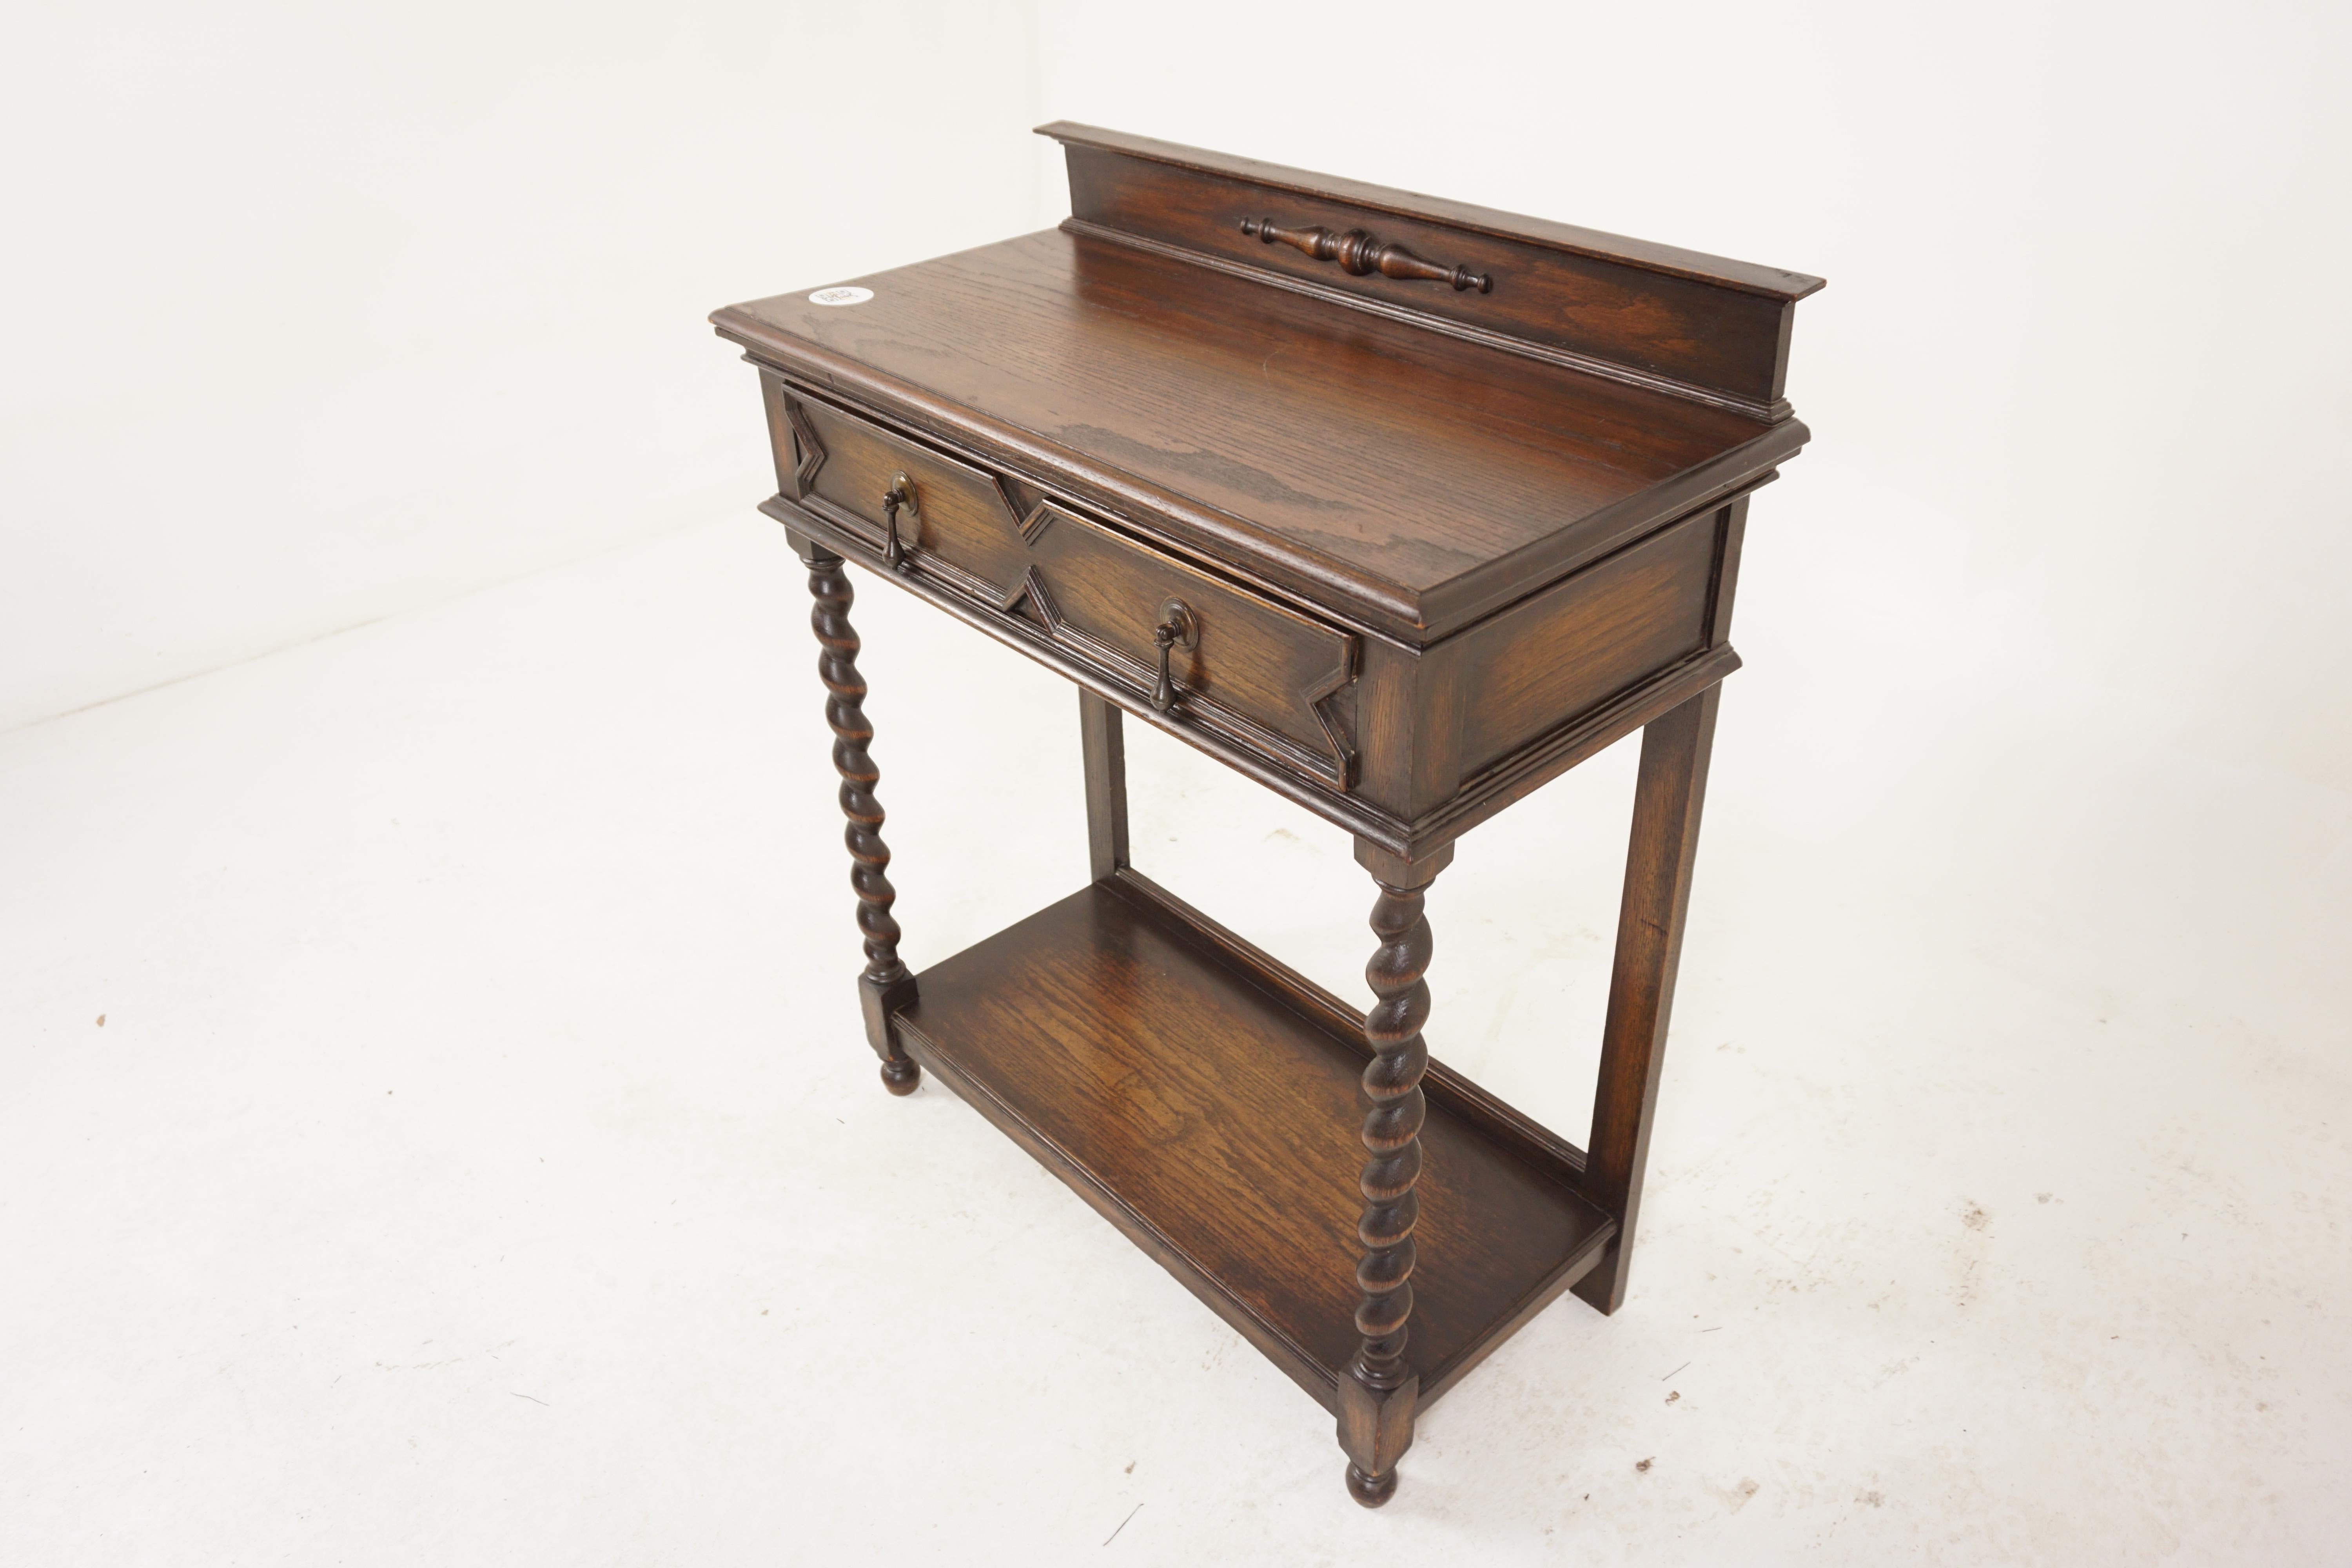 Antique oak barley twist hall table, sofa table, Scotland 1910, H603


Scotland 1910
Solid Oak
Original Finish
A shaped gallery to the top
With a single drawer with shaped molding to the front
With its original metal handles
Standing on a